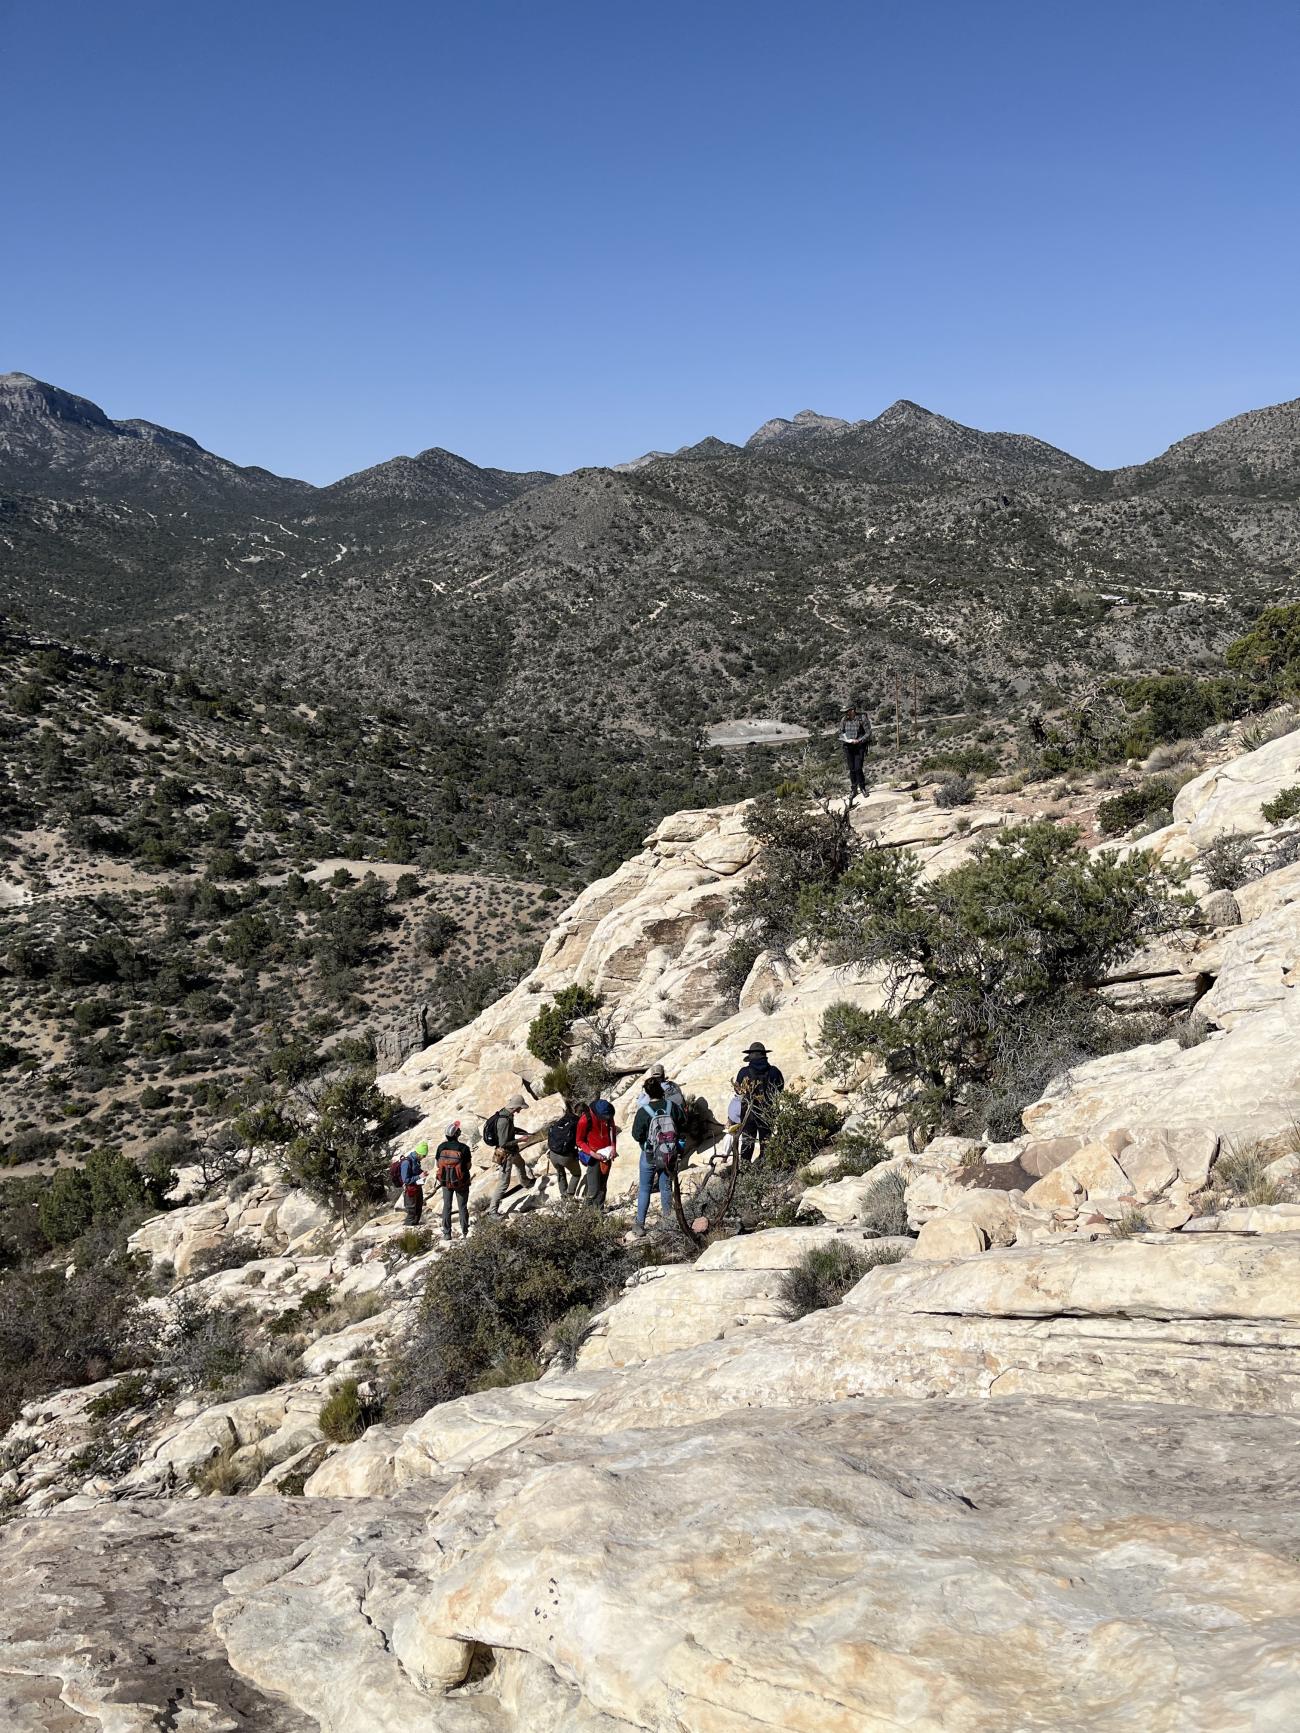 Students hike down a trail with mountain range in background